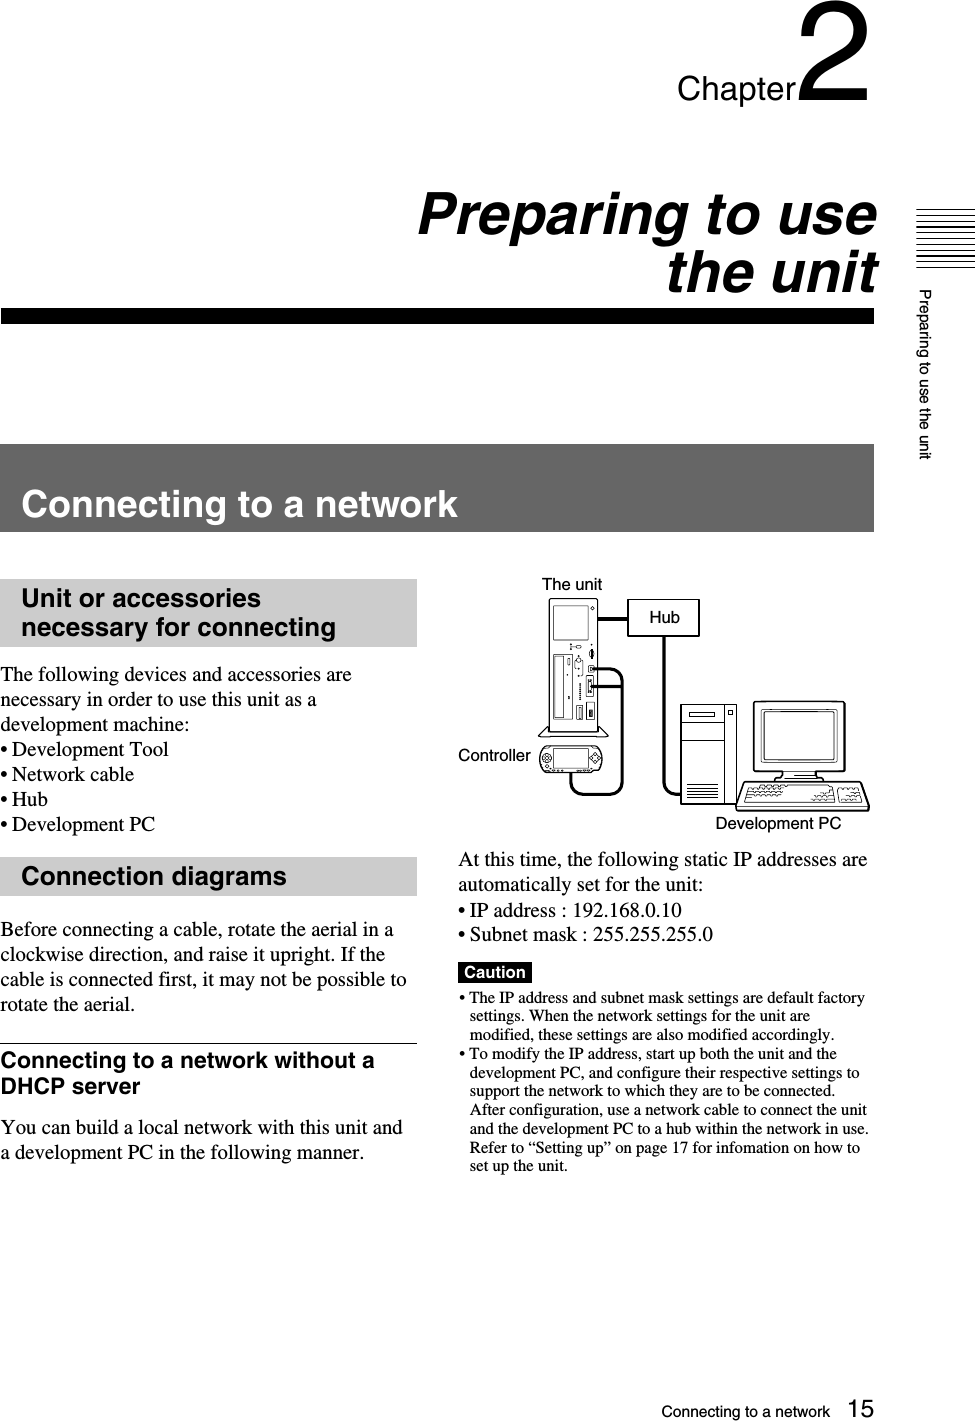 Preparing to use the unit15Chapter2Preparing to usethe unitConnecting to a networkUnit or accessoriesnecessary for connectingThe following devices and accessories arenecessary in order to use this unit as adevelopment machine:•Development Tool•Network cable•Hub•Development PCConnection diagramsBefore connecting a cable, rotate the aerial in aclockwise direction, and raise it upright. If thecable is connected first, it may not be possible torotate the aerial.Connecting to a network without aDHCP serverYou can build a local network with this unit anda development PC in the following manner.At this time, the following static IP addresses areautomatically set for the unit:•IP address : 192.168.0.10•Subnet mask : 255.255.255.0Caution• The IP address and subnet mask settings are default factorysettings. When the network settings for the unit aremodified, these settings are also modified accordingly.• To modify the IP address, start up both the unit and thedevelopment PC, and configure their respective settings tosupport the network to which they are to be connected.After configuration, use a network cable to connect the unitand the development PC to a hub within the network in use.Refer to “Setting up” on page 17 for infomation on how toset up the unit.HubControllerThe unitDevelopment PCConnecting to a network